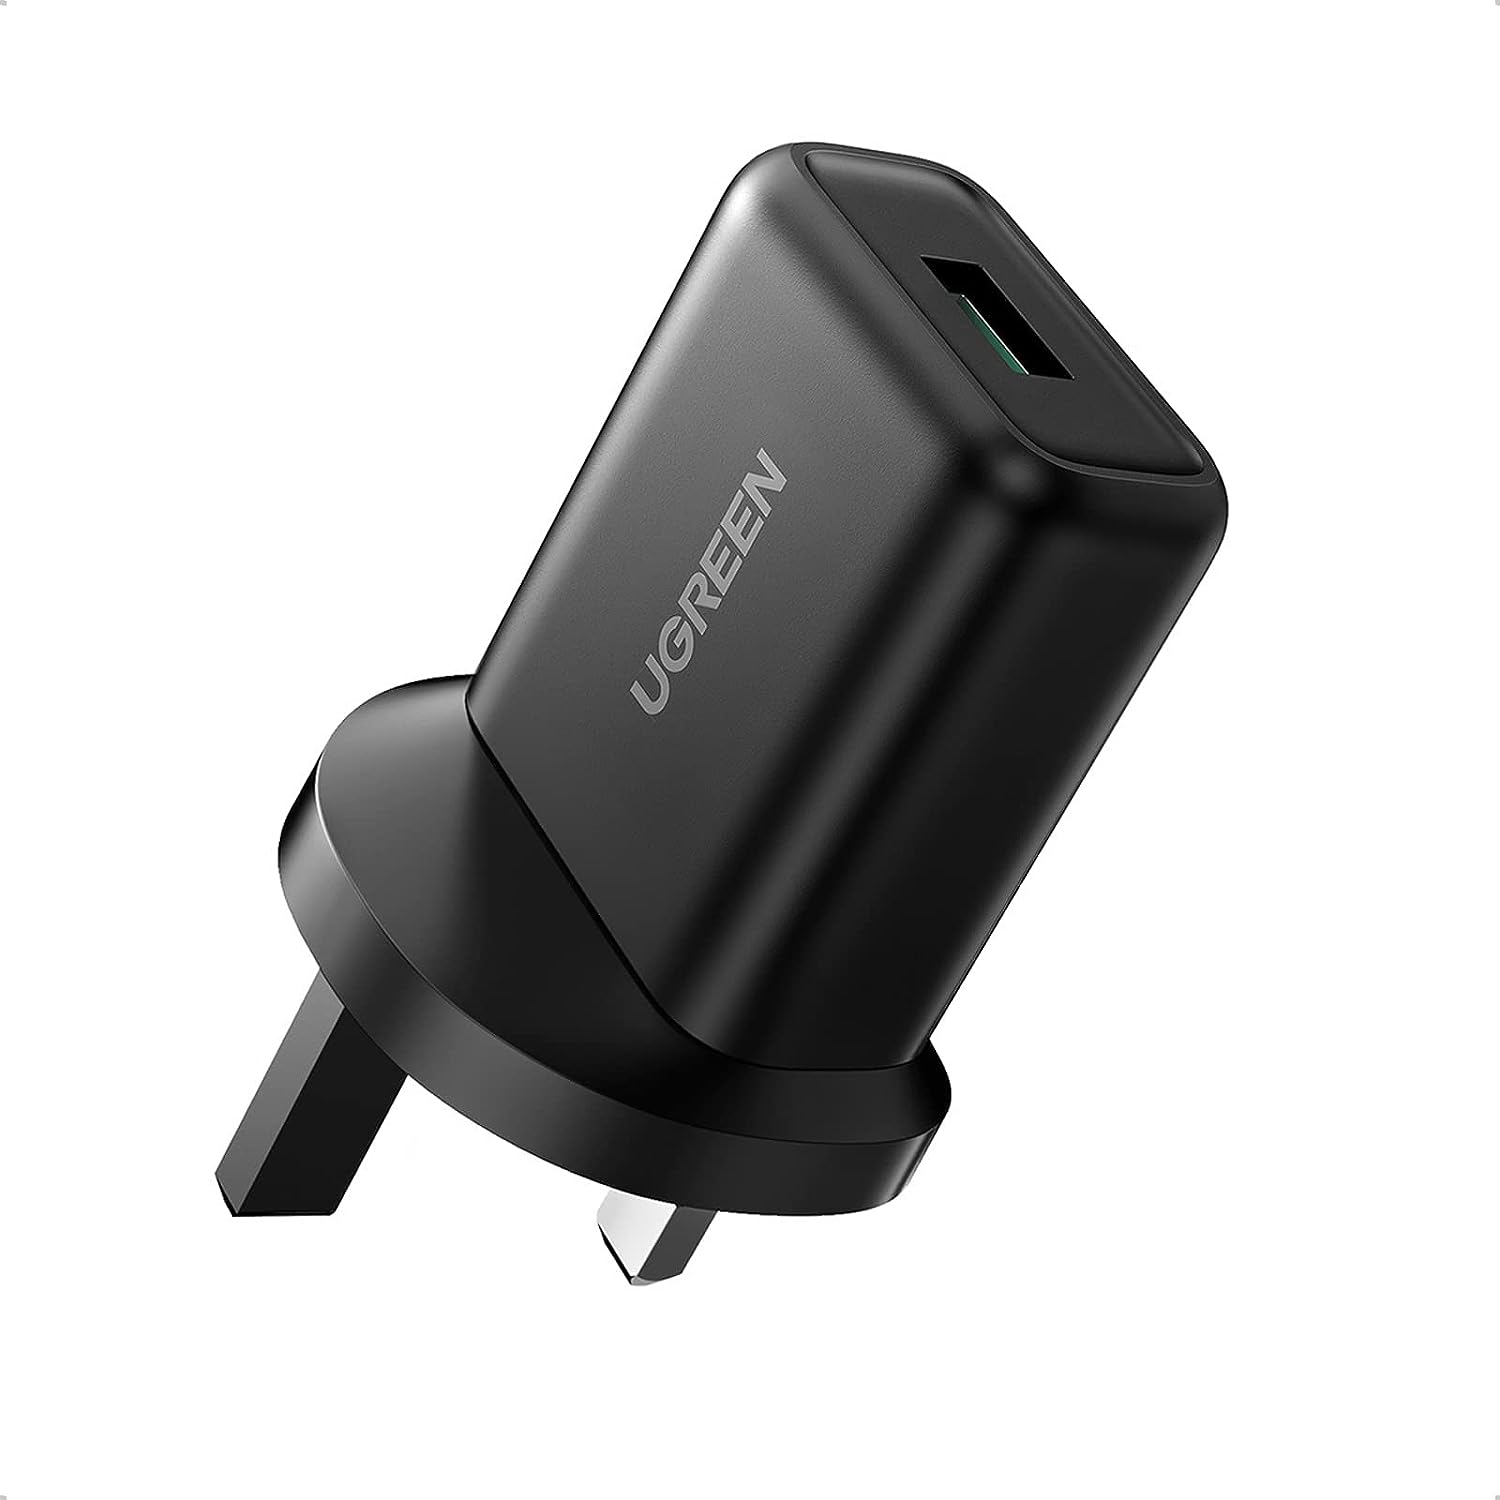 UGreen wall charger 18w fast usb charger 3.0 - Black